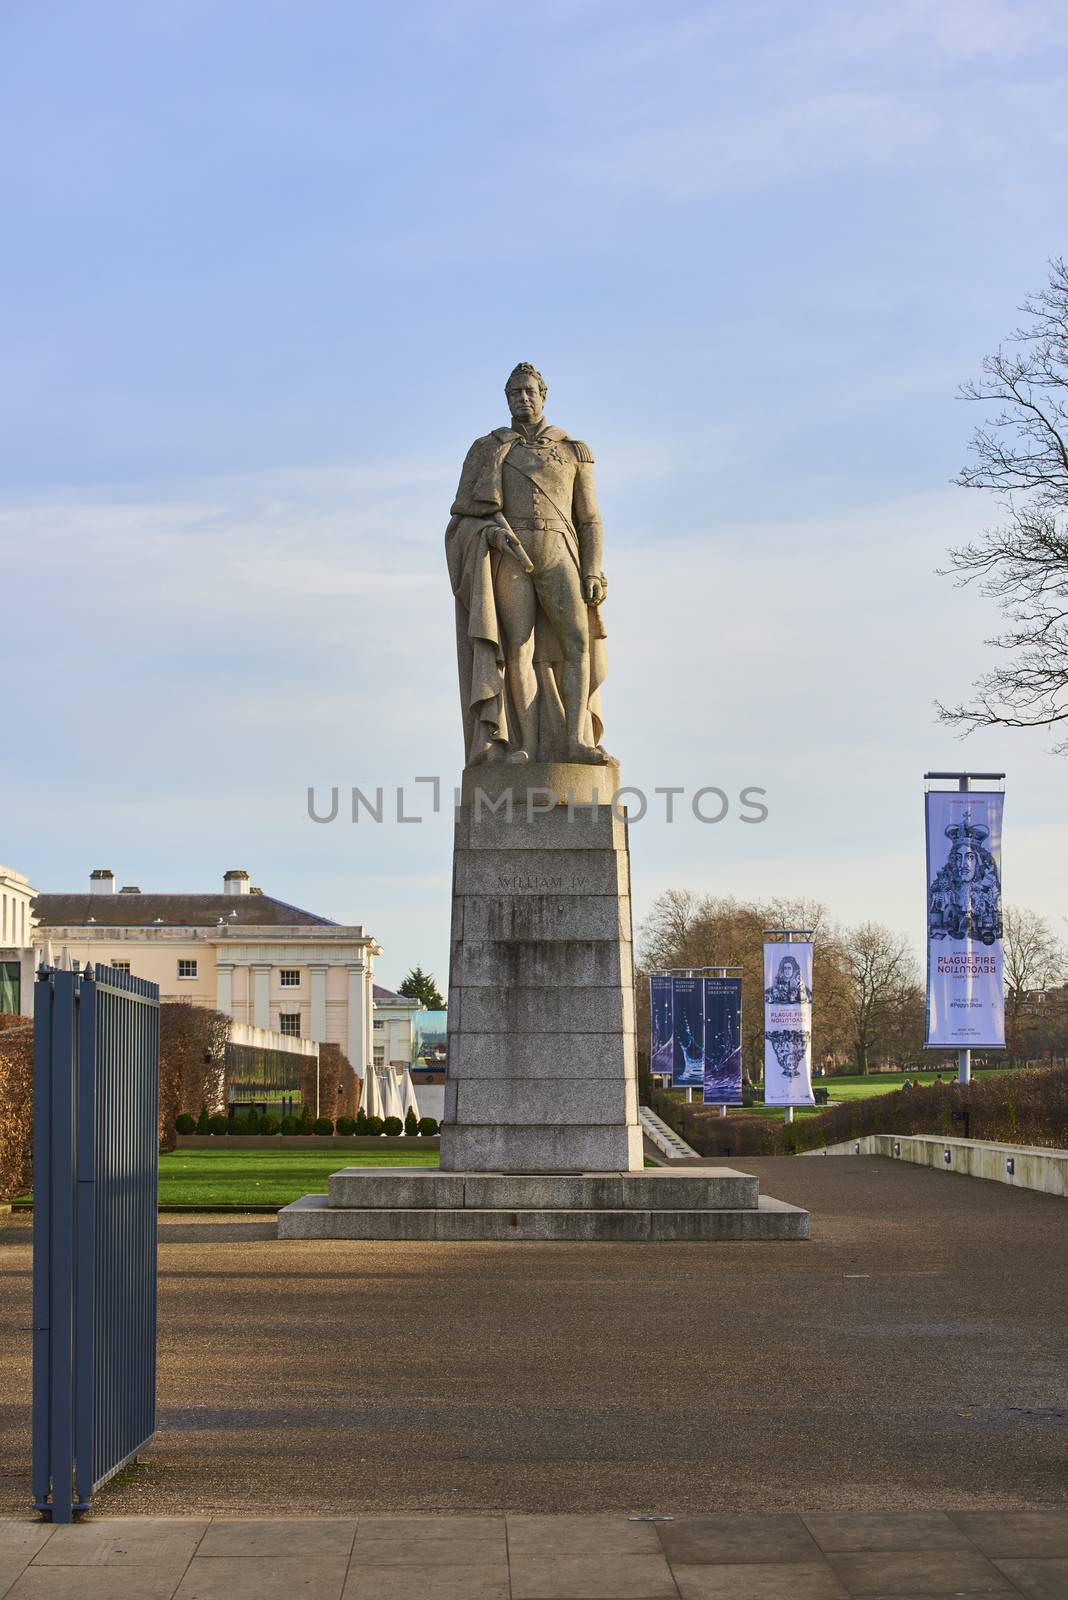 LONDON, UK - DECEMBER 28: Statue of King William VI in Greenwich, outside the Royal Maritime Museum. December 28, 2015 in London.